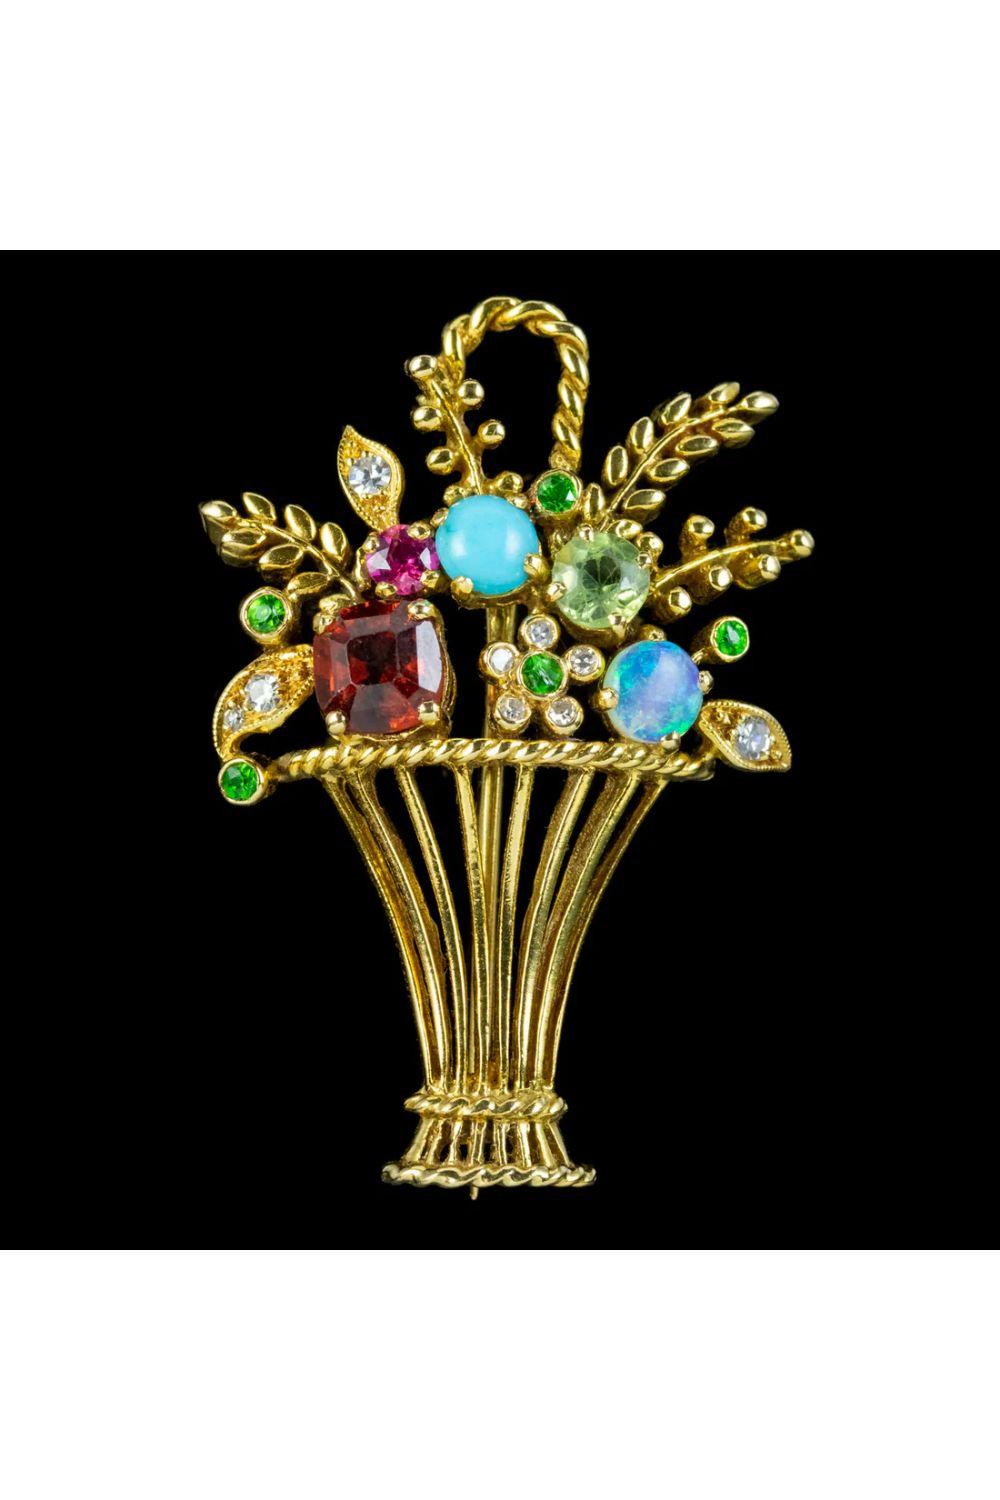 A beautiful 20th Century Giardinetti brooch depicting a vase of flowers and leaves topped with a turquoise, opal, garnet, ruby, peridots, and diamonds. 

Giardinetti is Italian for “Little Gardens”. The jewellery originated in Italy and became a